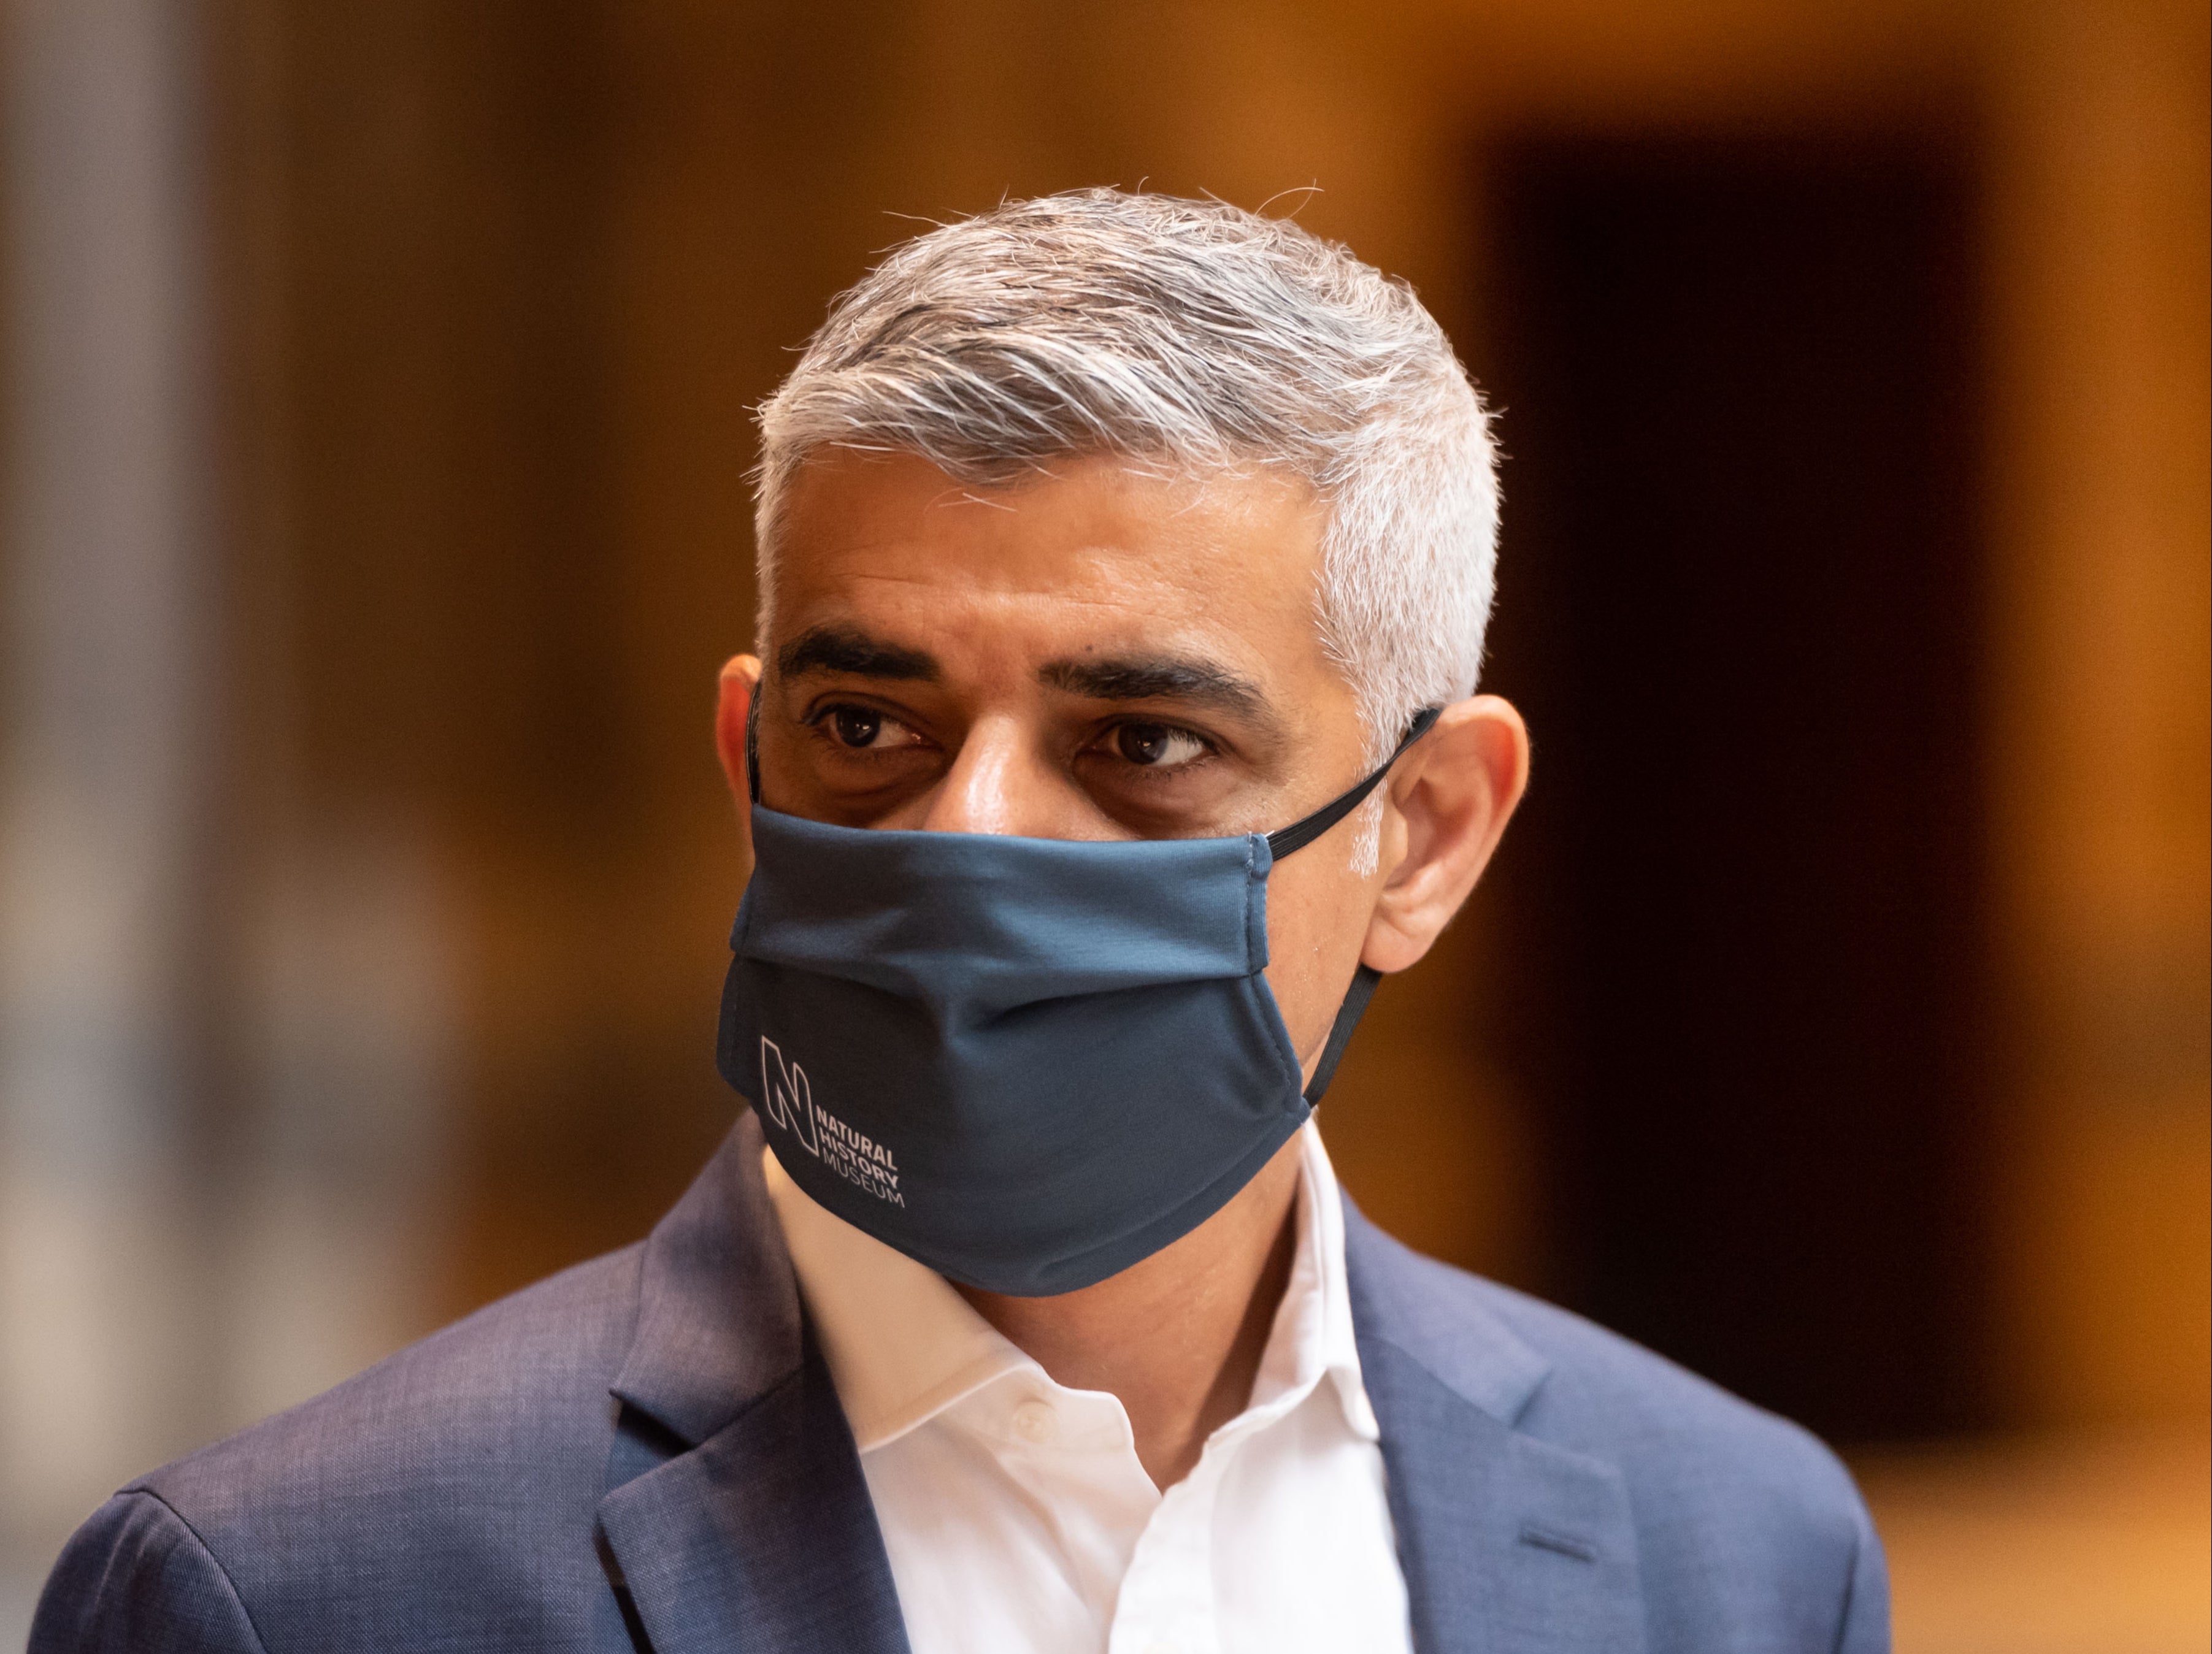 A spokesperson for the mayor of London defended the policy